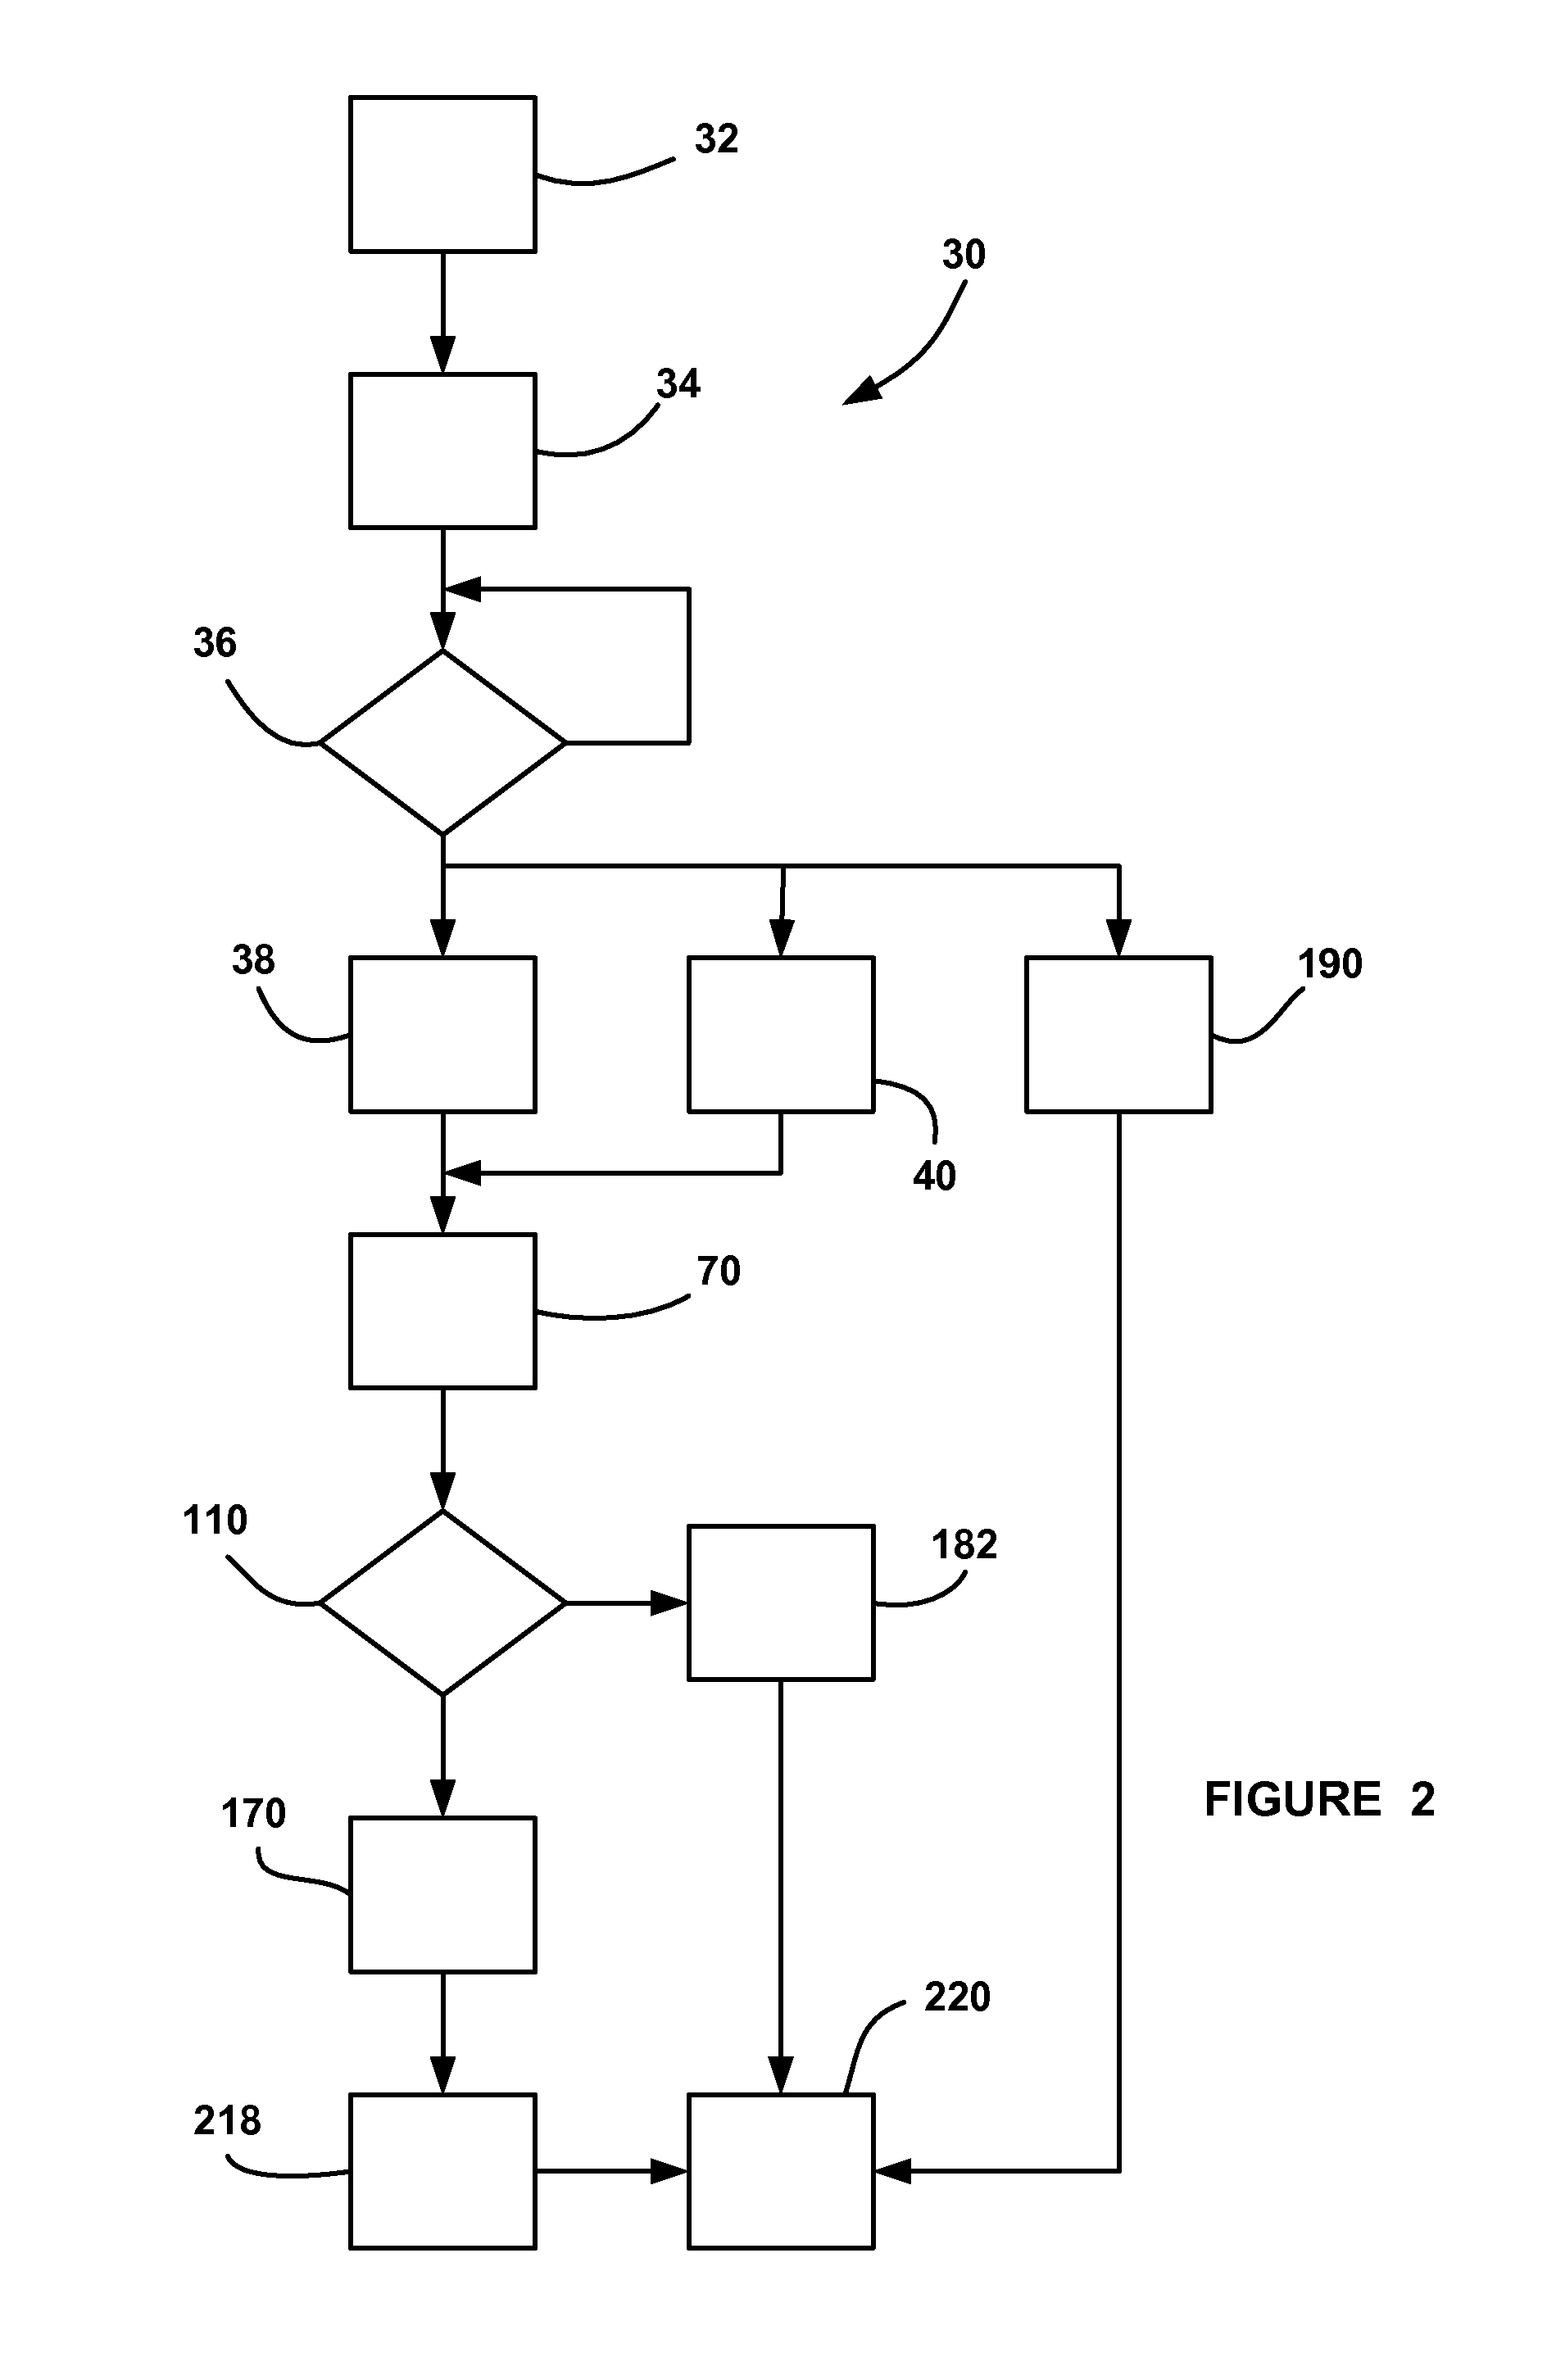 Algorithm for determining the capacity of a battery while in service